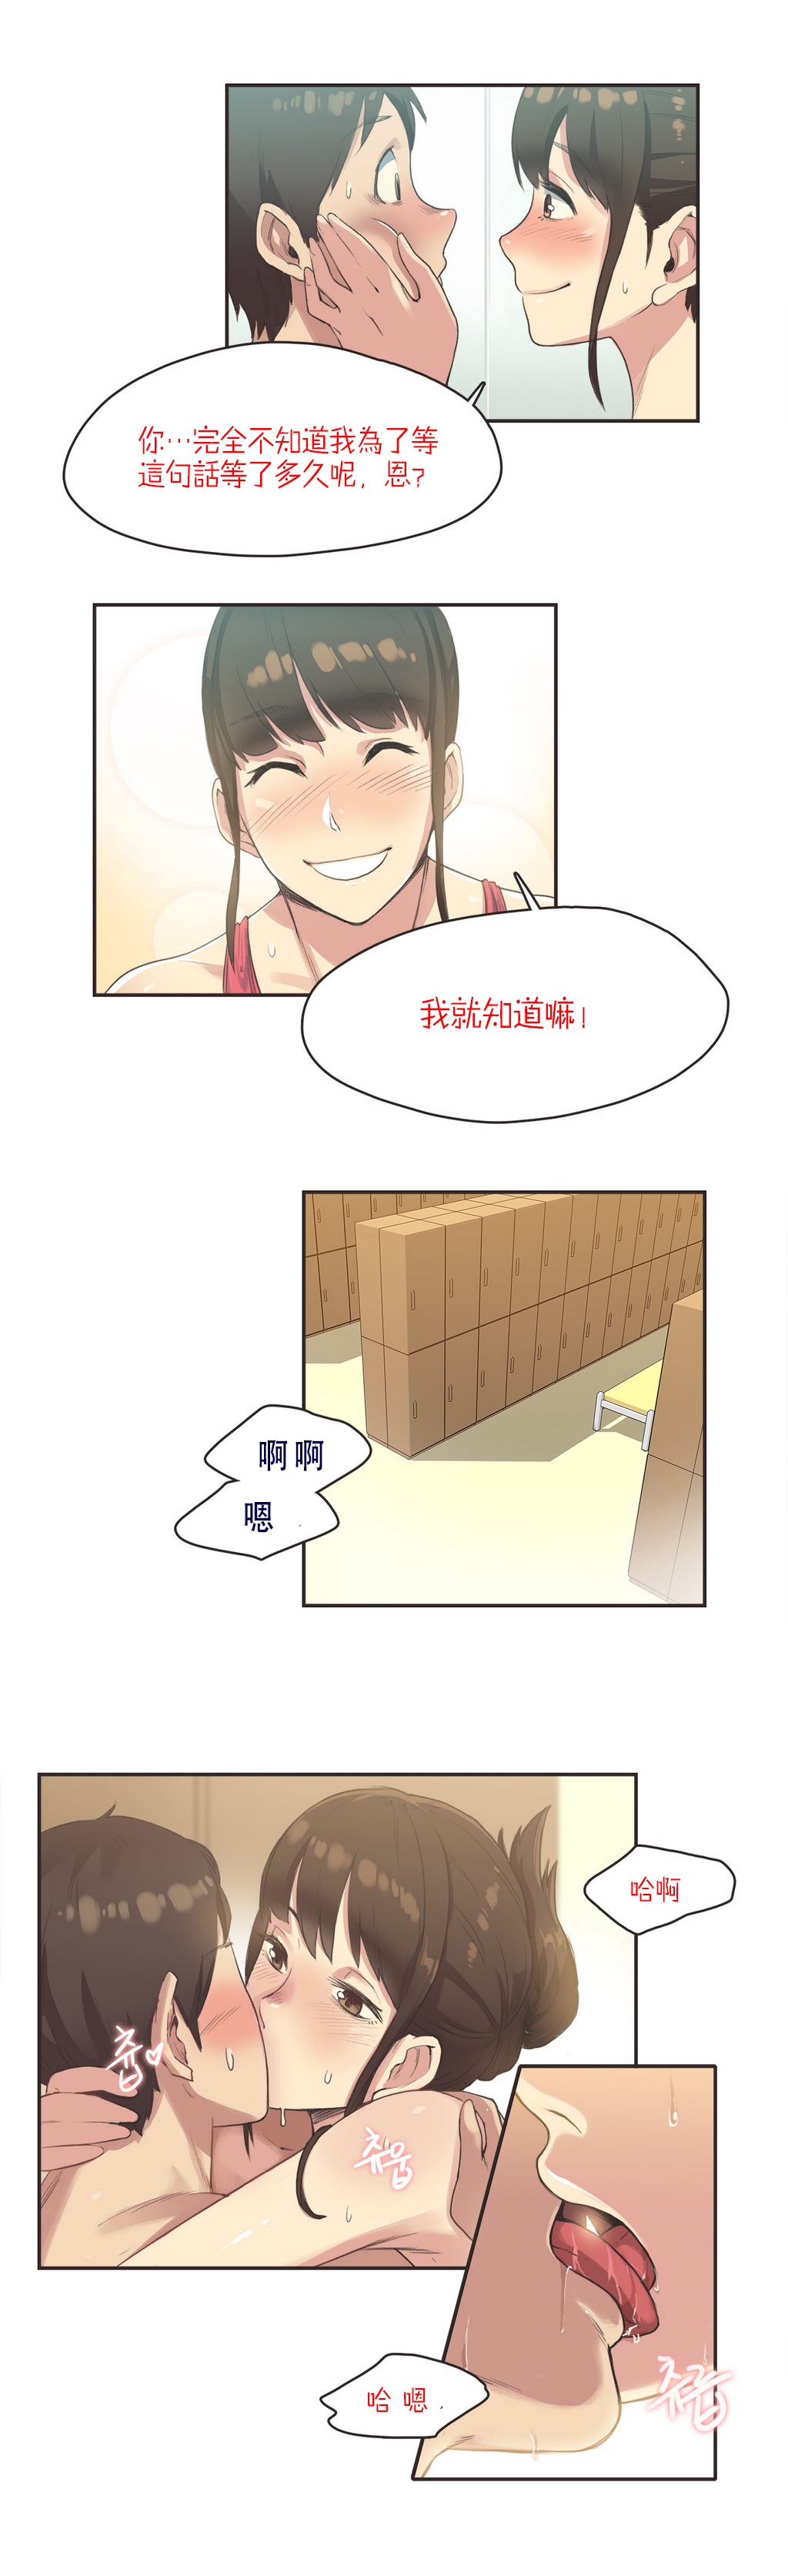 [Gamang] Sports Girl Ch.7 [Chinese] [高麗個人漢化] 6